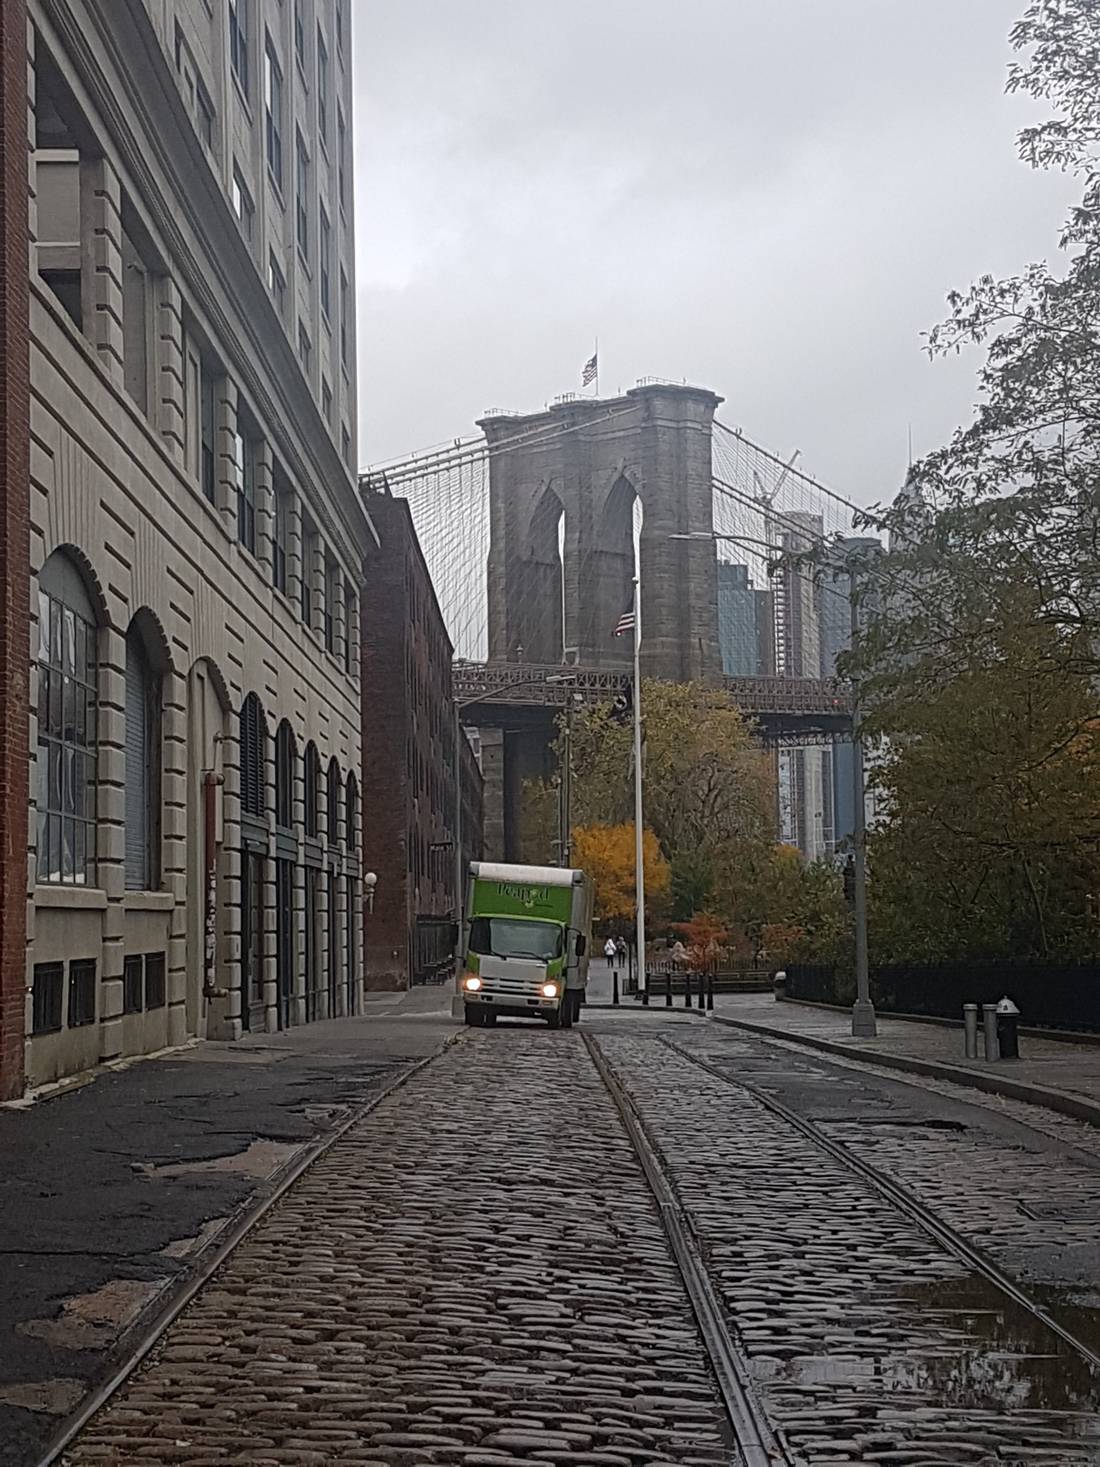 I would have like to run over the Brooklyn Bridge as well but I was still very achy from the marathon and we still had plenty of tourist walking to do.